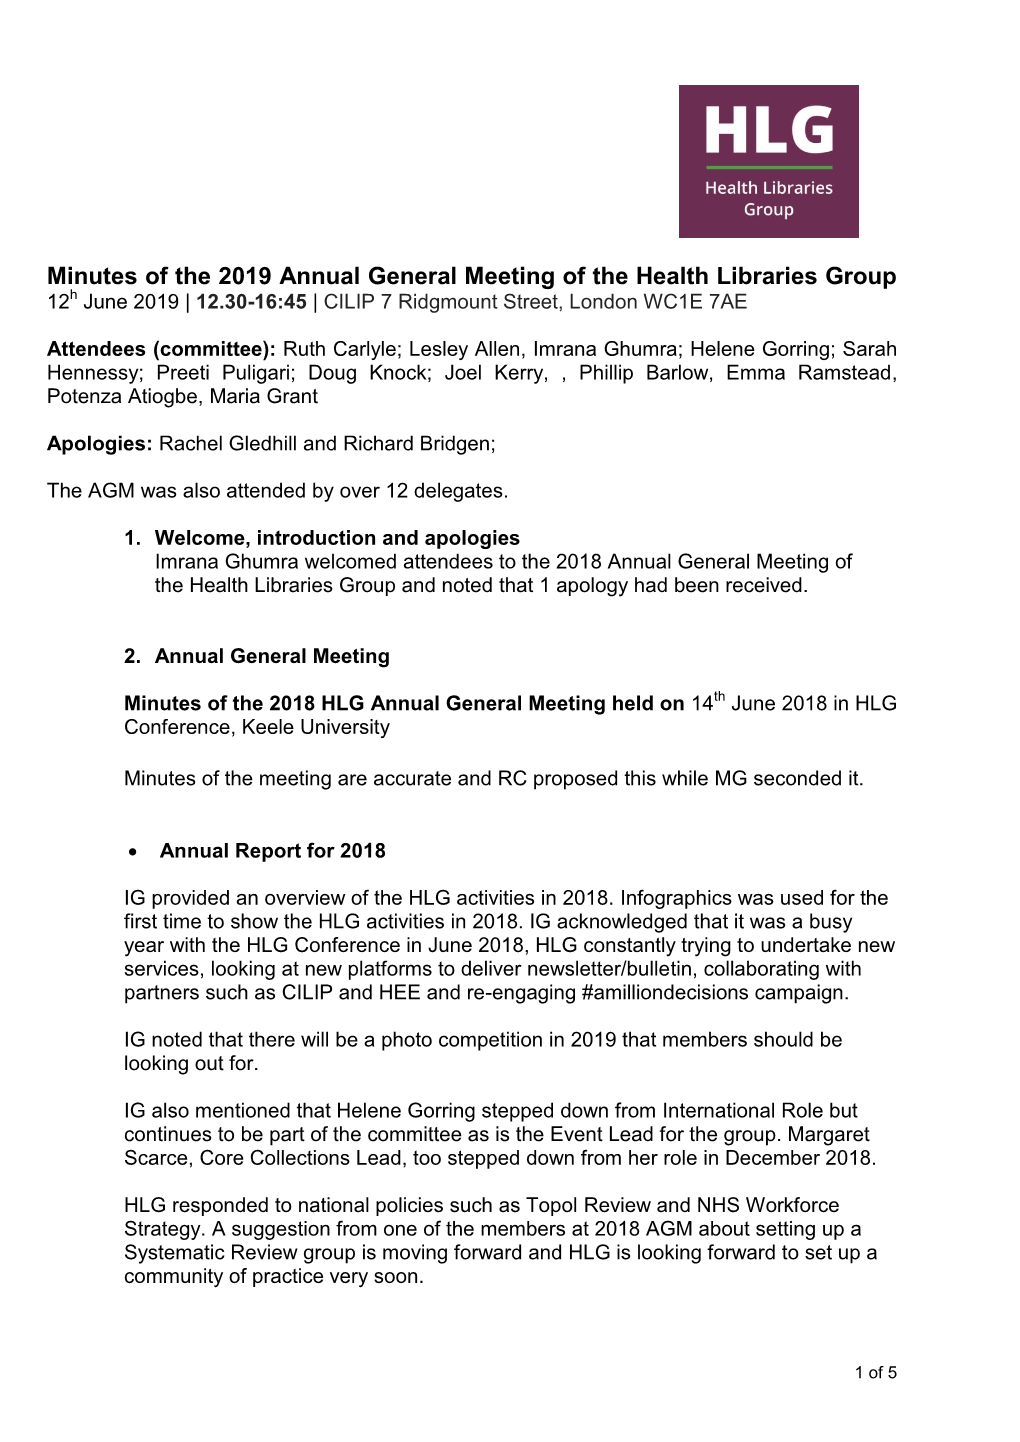 Minutes of the 2019 Annual General Meeting of the Health Libraries Group 12H June 2019 | 12.30-16:45 | CILIP 7 Ridgmount Street, London WC1E 7AE